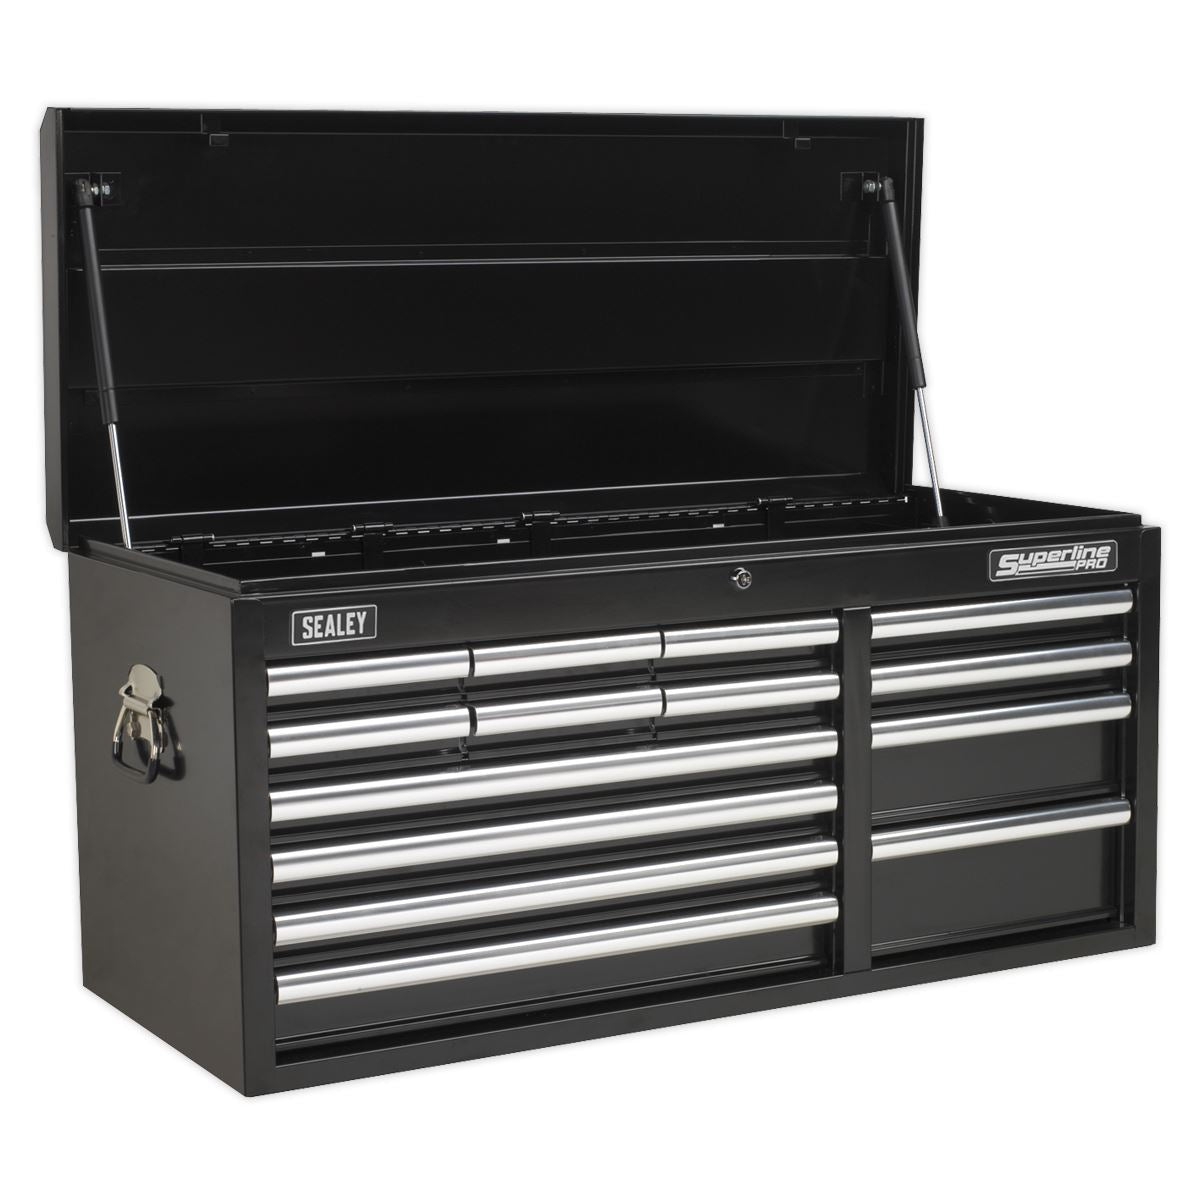 Sealey Superline Pro Topchest 14 Drawer with Ball-Bearing Slides Heavy-Duty - Black